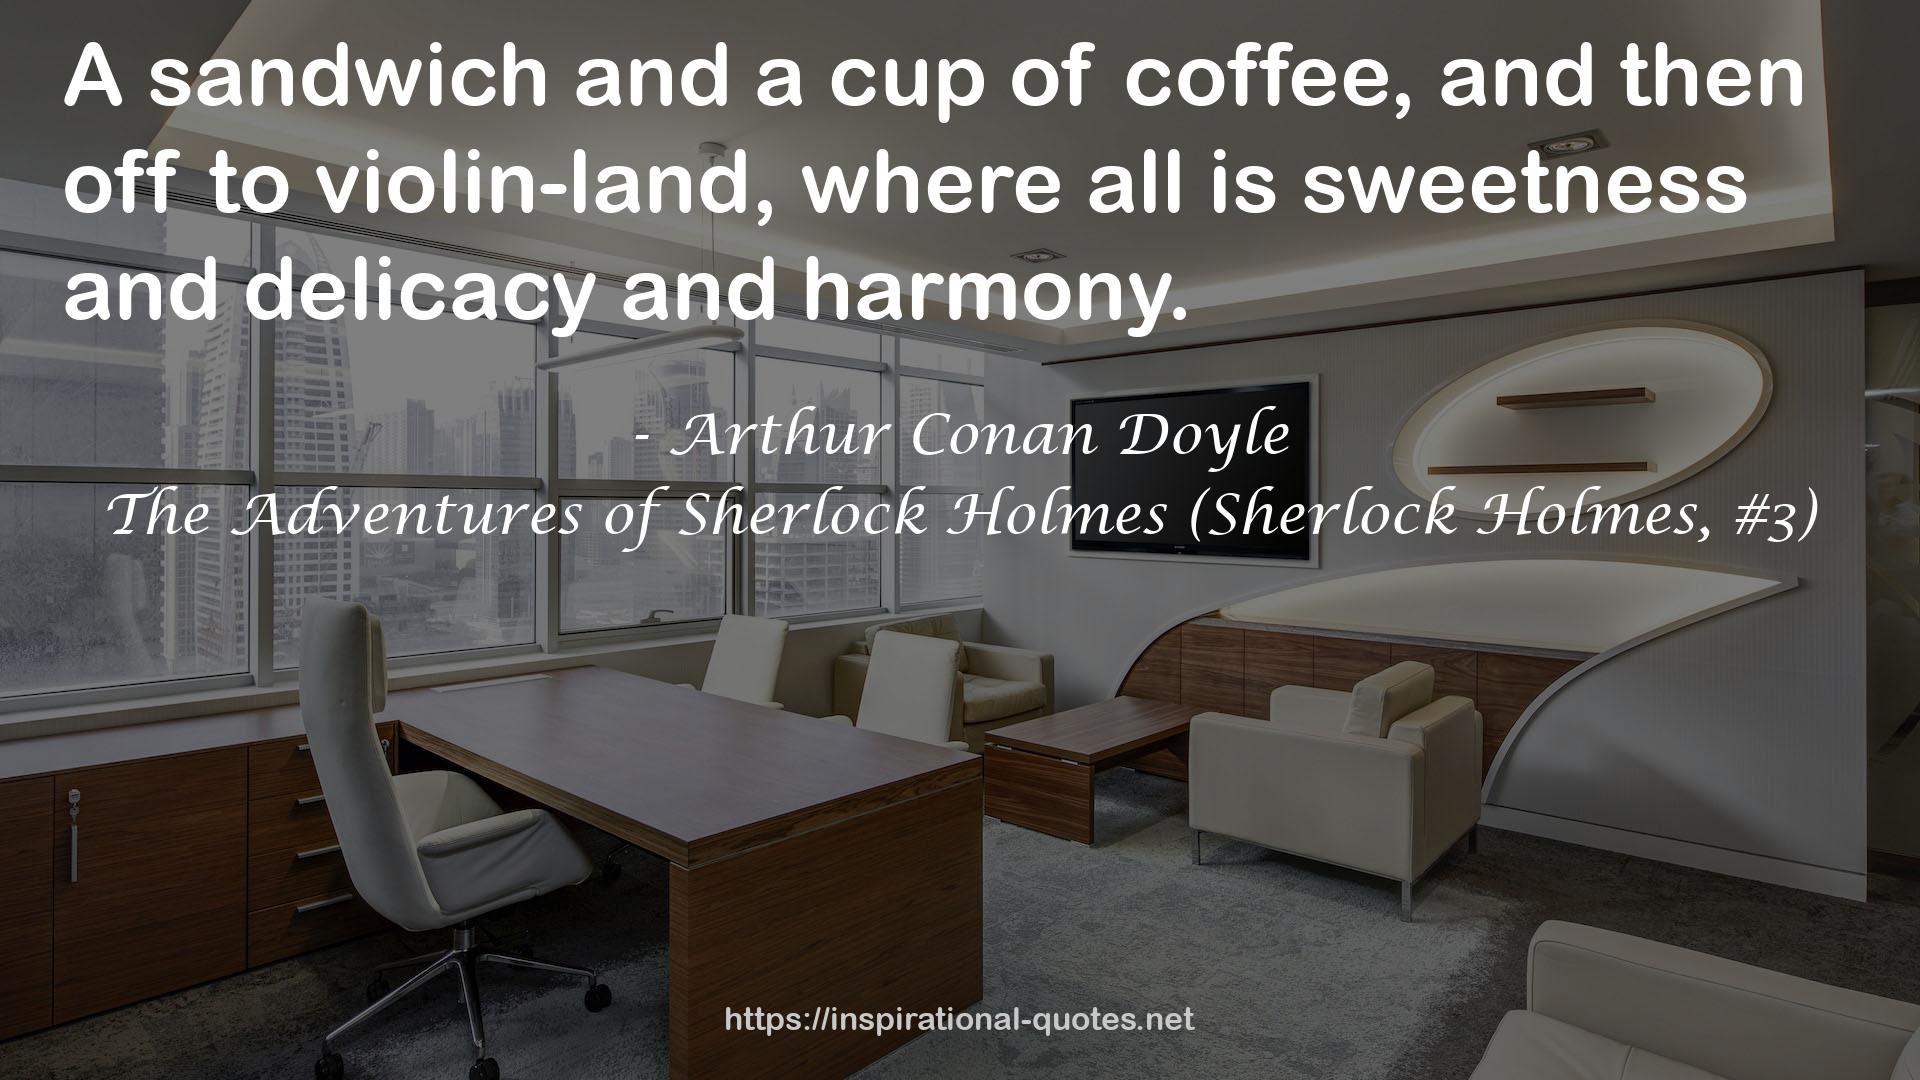 The Adventures of Sherlock Holmes (Sherlock Holmes, #3) QUOTES